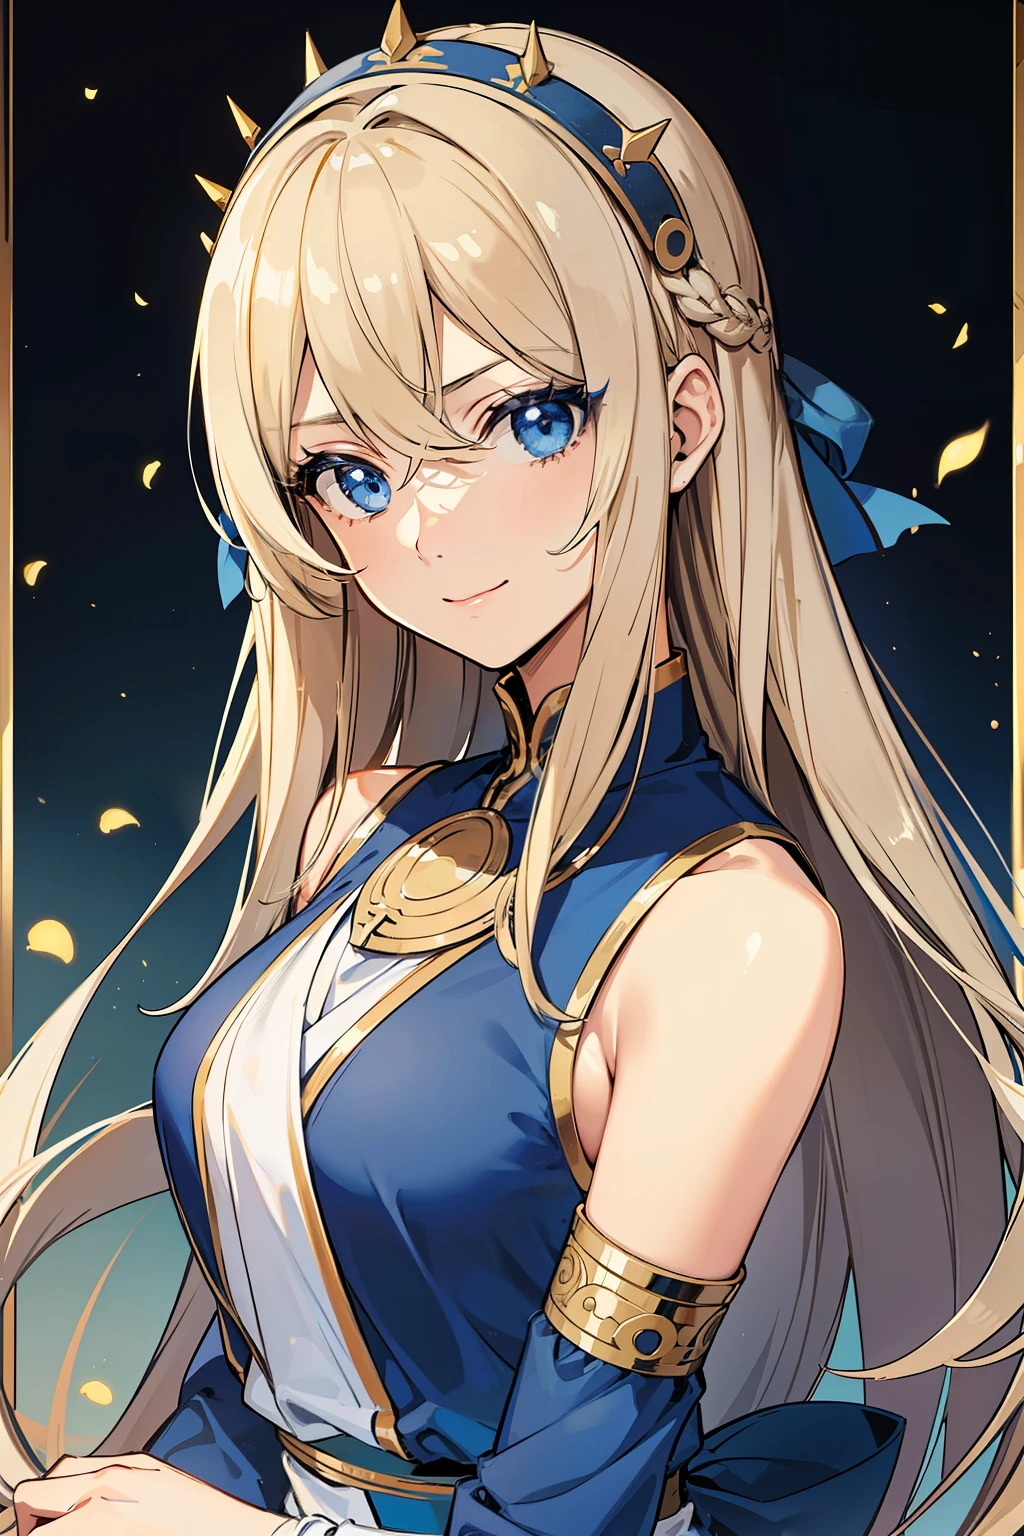 (high-quality, breathtaking),(expressive eyes, perfect face) 1girl, girl, solo, adult, blonde hair, blue coloured eyes, stylised hair, gentle smile, medium length hair, loose hair, side bangs, curley hair, really spiky hair, looking at viewer, portrait, ancient greek clothes, blue black and white tunic, white Chlamys, sleeveless, greek, blue and gold sash, music inspired background, related to Orpheus, C cup size breasts, hair accessory blue